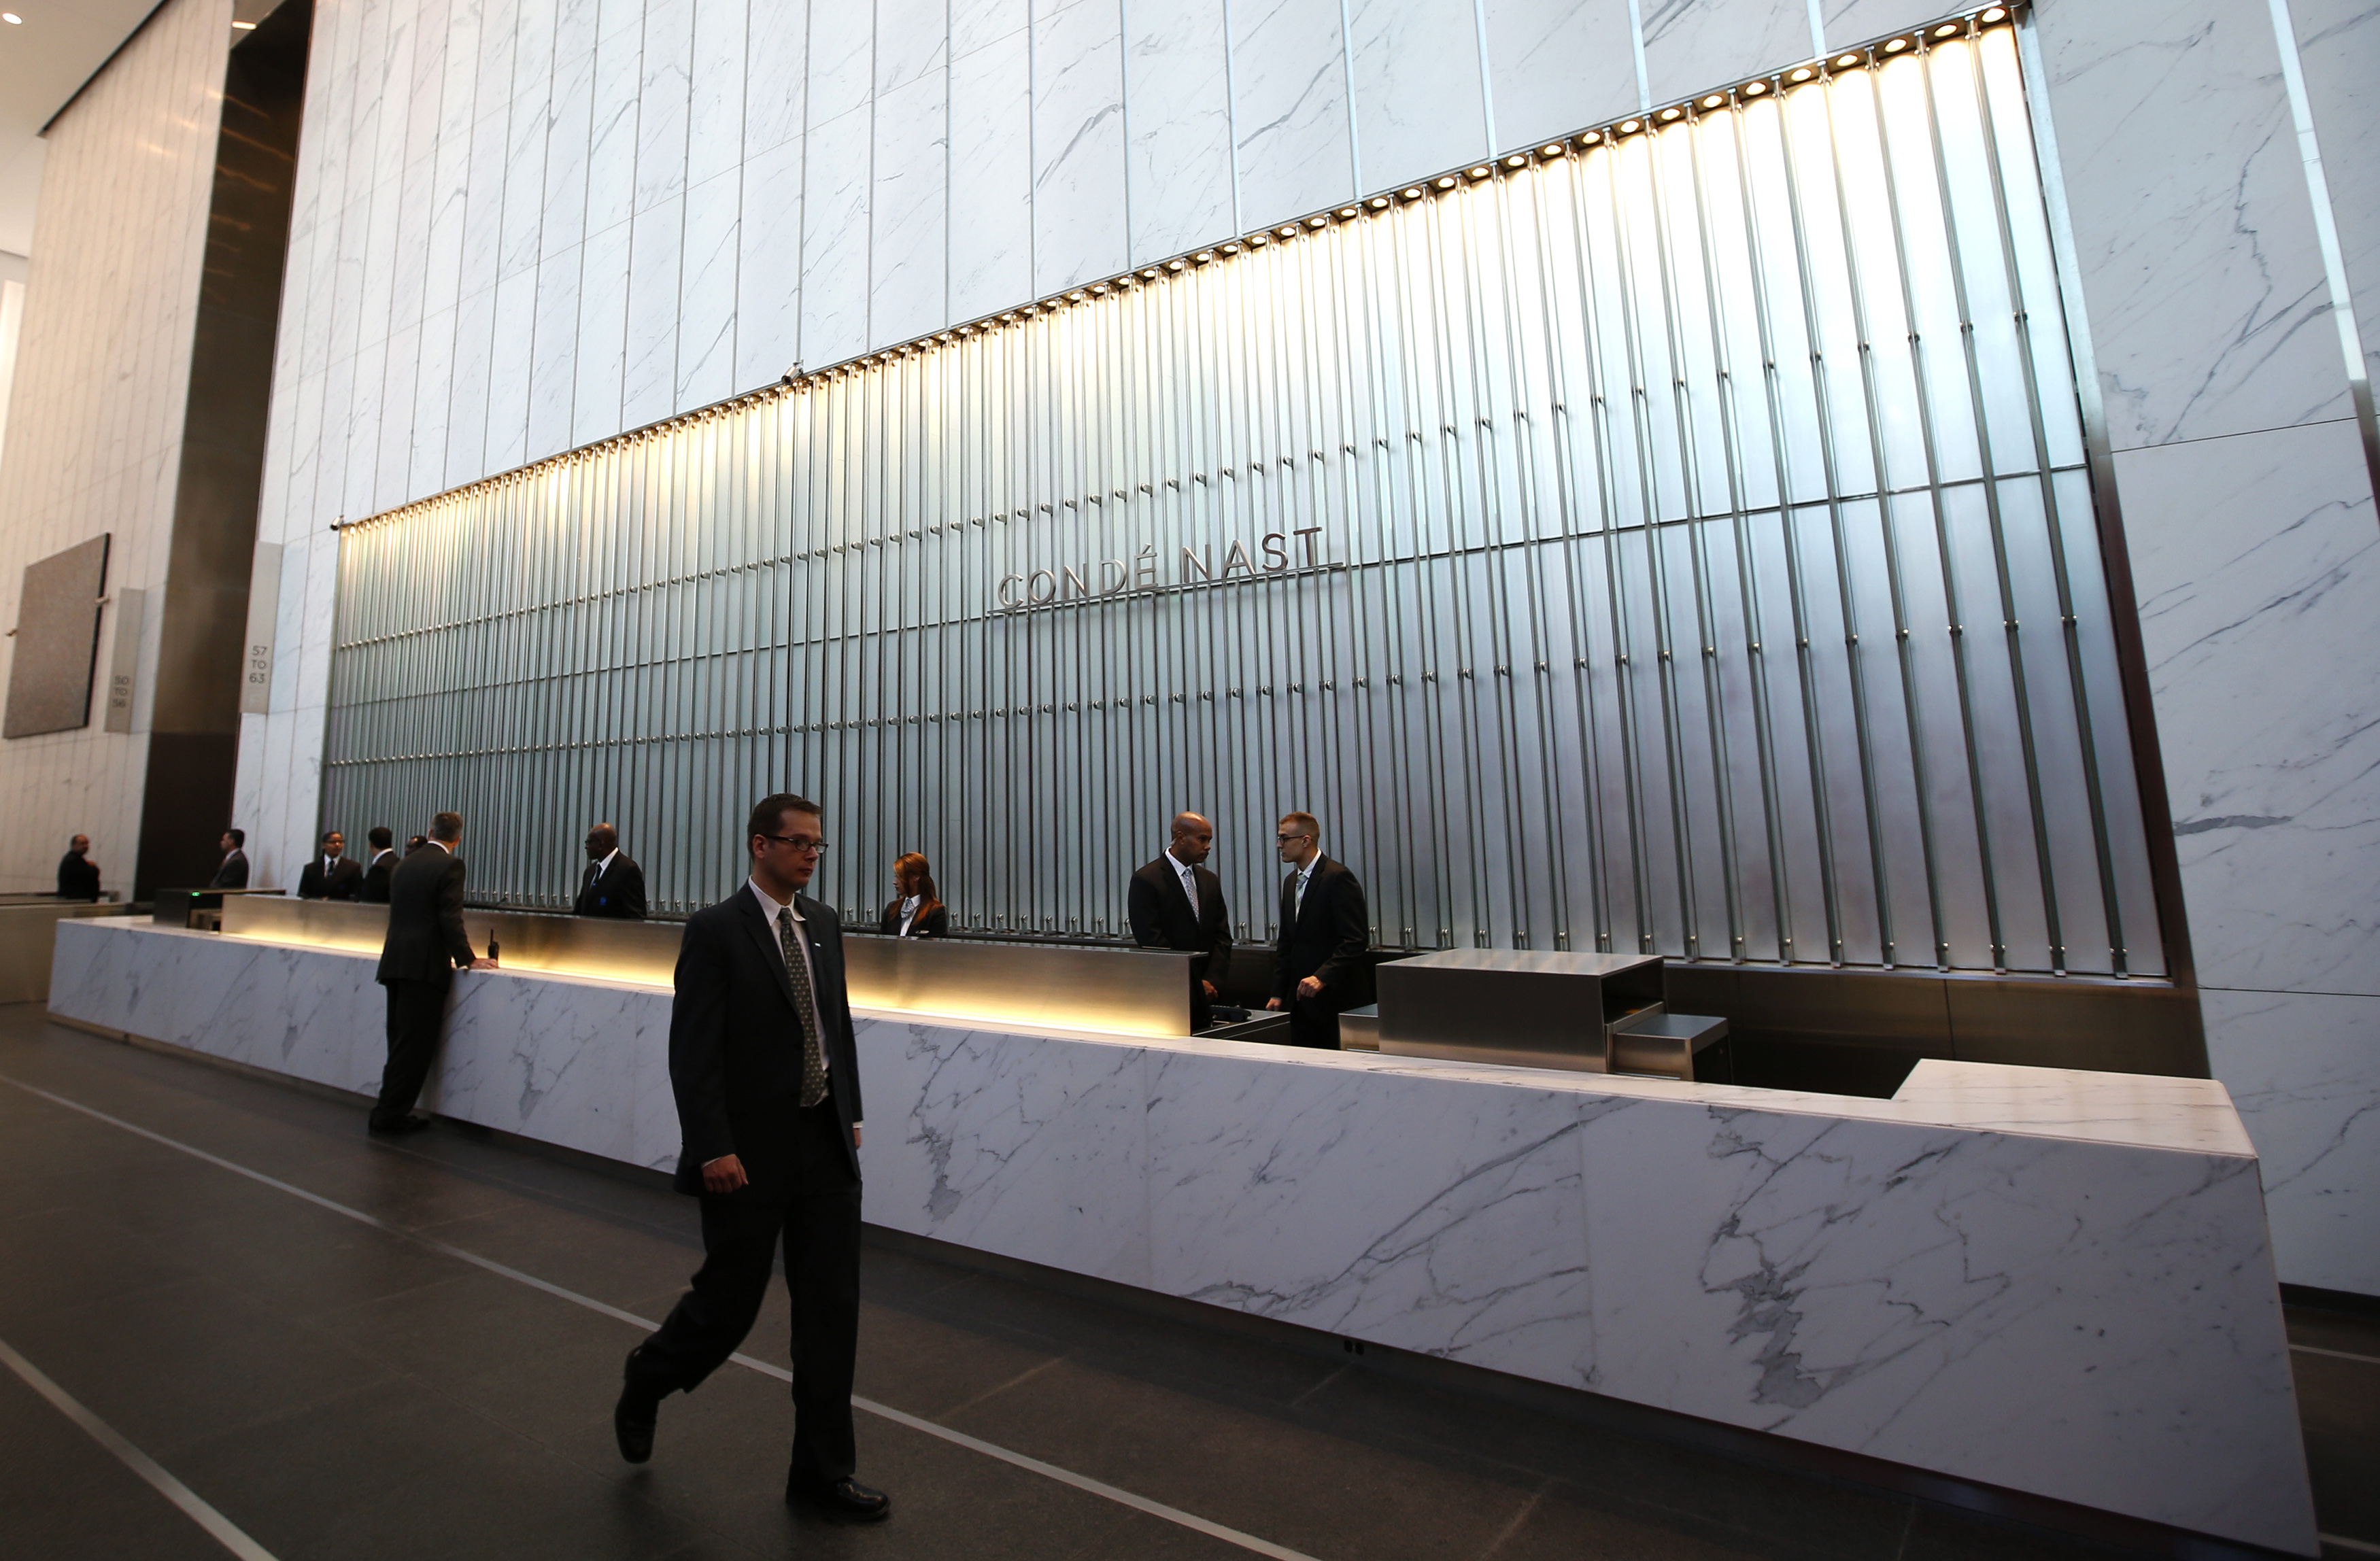 Cond&eacute;  Nast employees work in the lobby of the One World Trade Center tower in New York City on Nov. 3, 2014 (Mike Segar—Reuters)